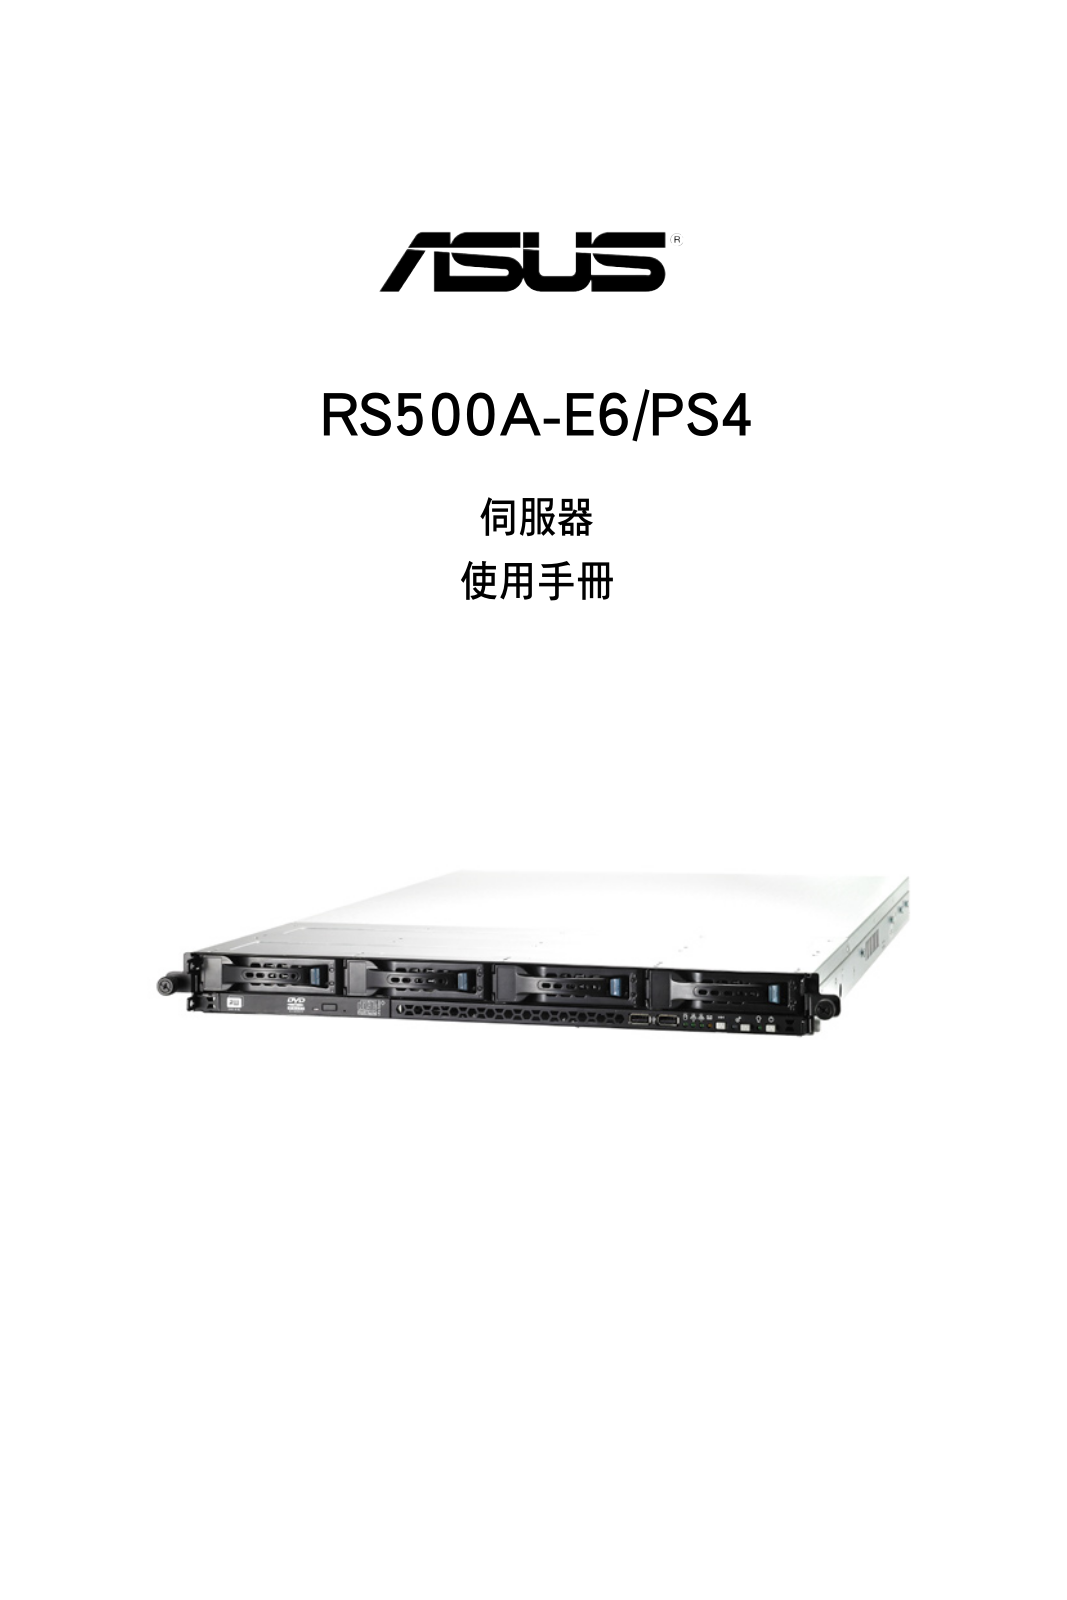 ASUS RS500A-E6-PS4, T6164 User Manual